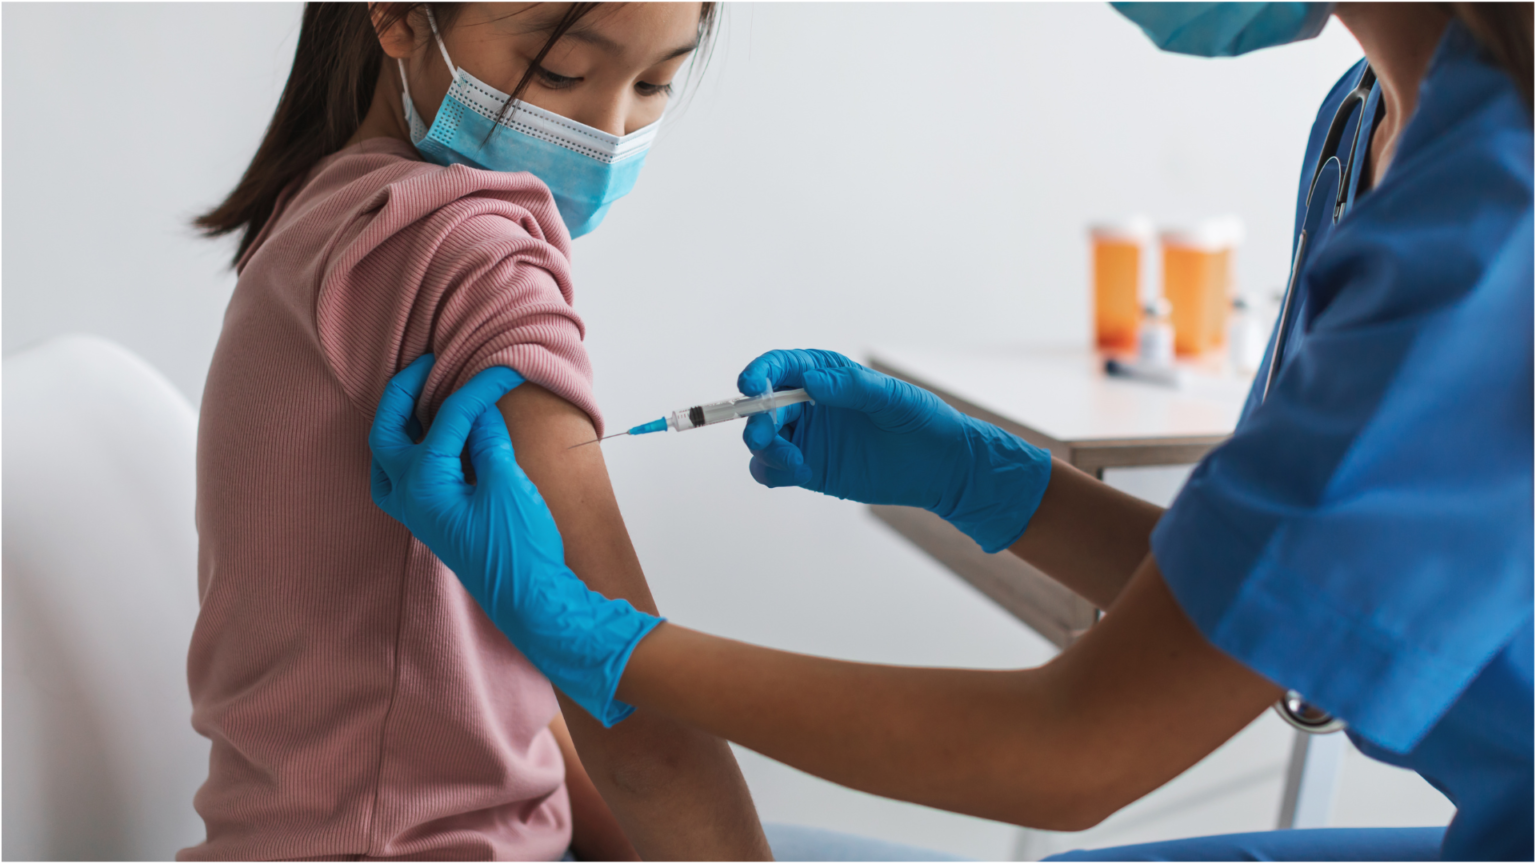 A secondary school student getting vaccinated